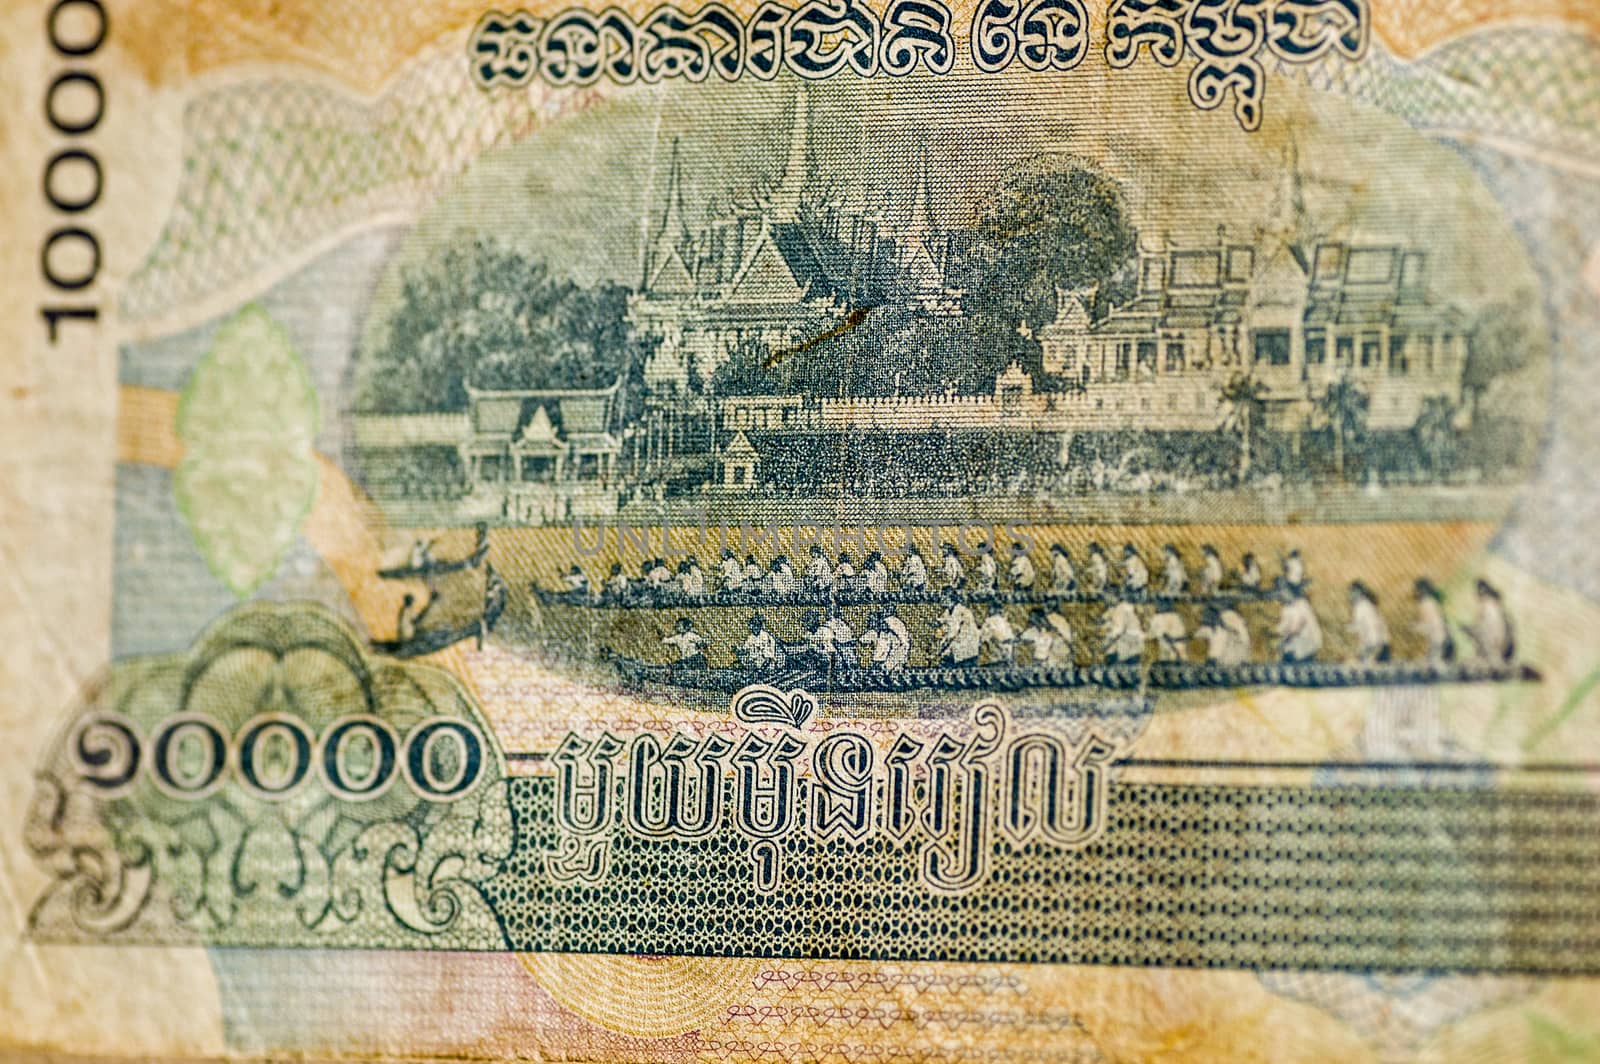 Water Festival, Cambodia banknote by BasPhoto